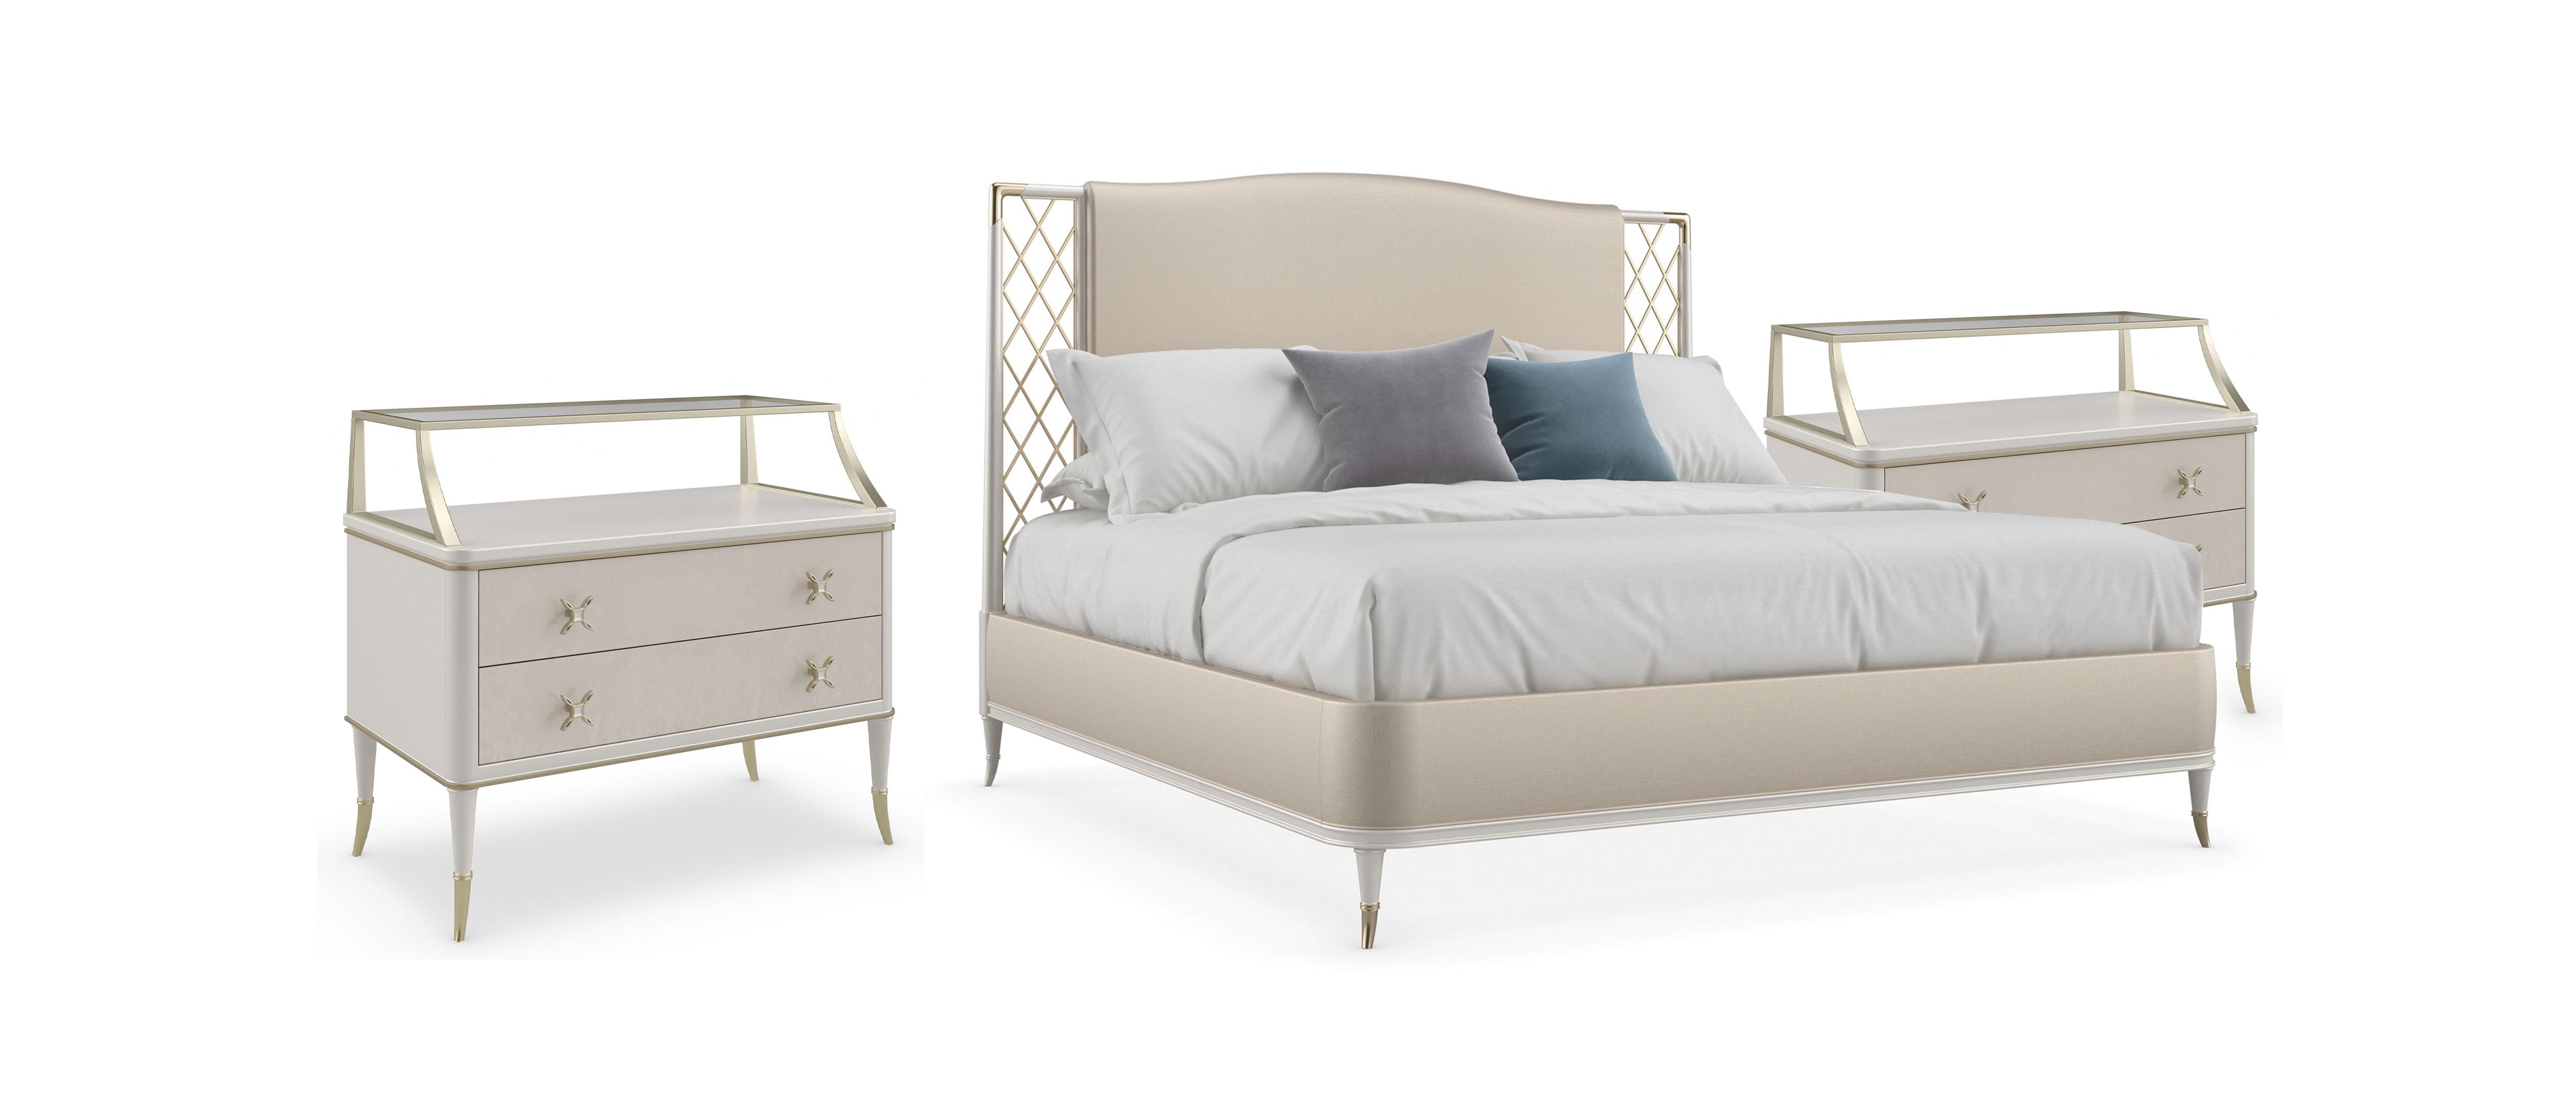 Contemporary Platform Bedroom Set STAR OF THE NIGHT-KING / ALL DOLLED UP CLA-021-101--2N-3PC in Cream, Gold Velvet